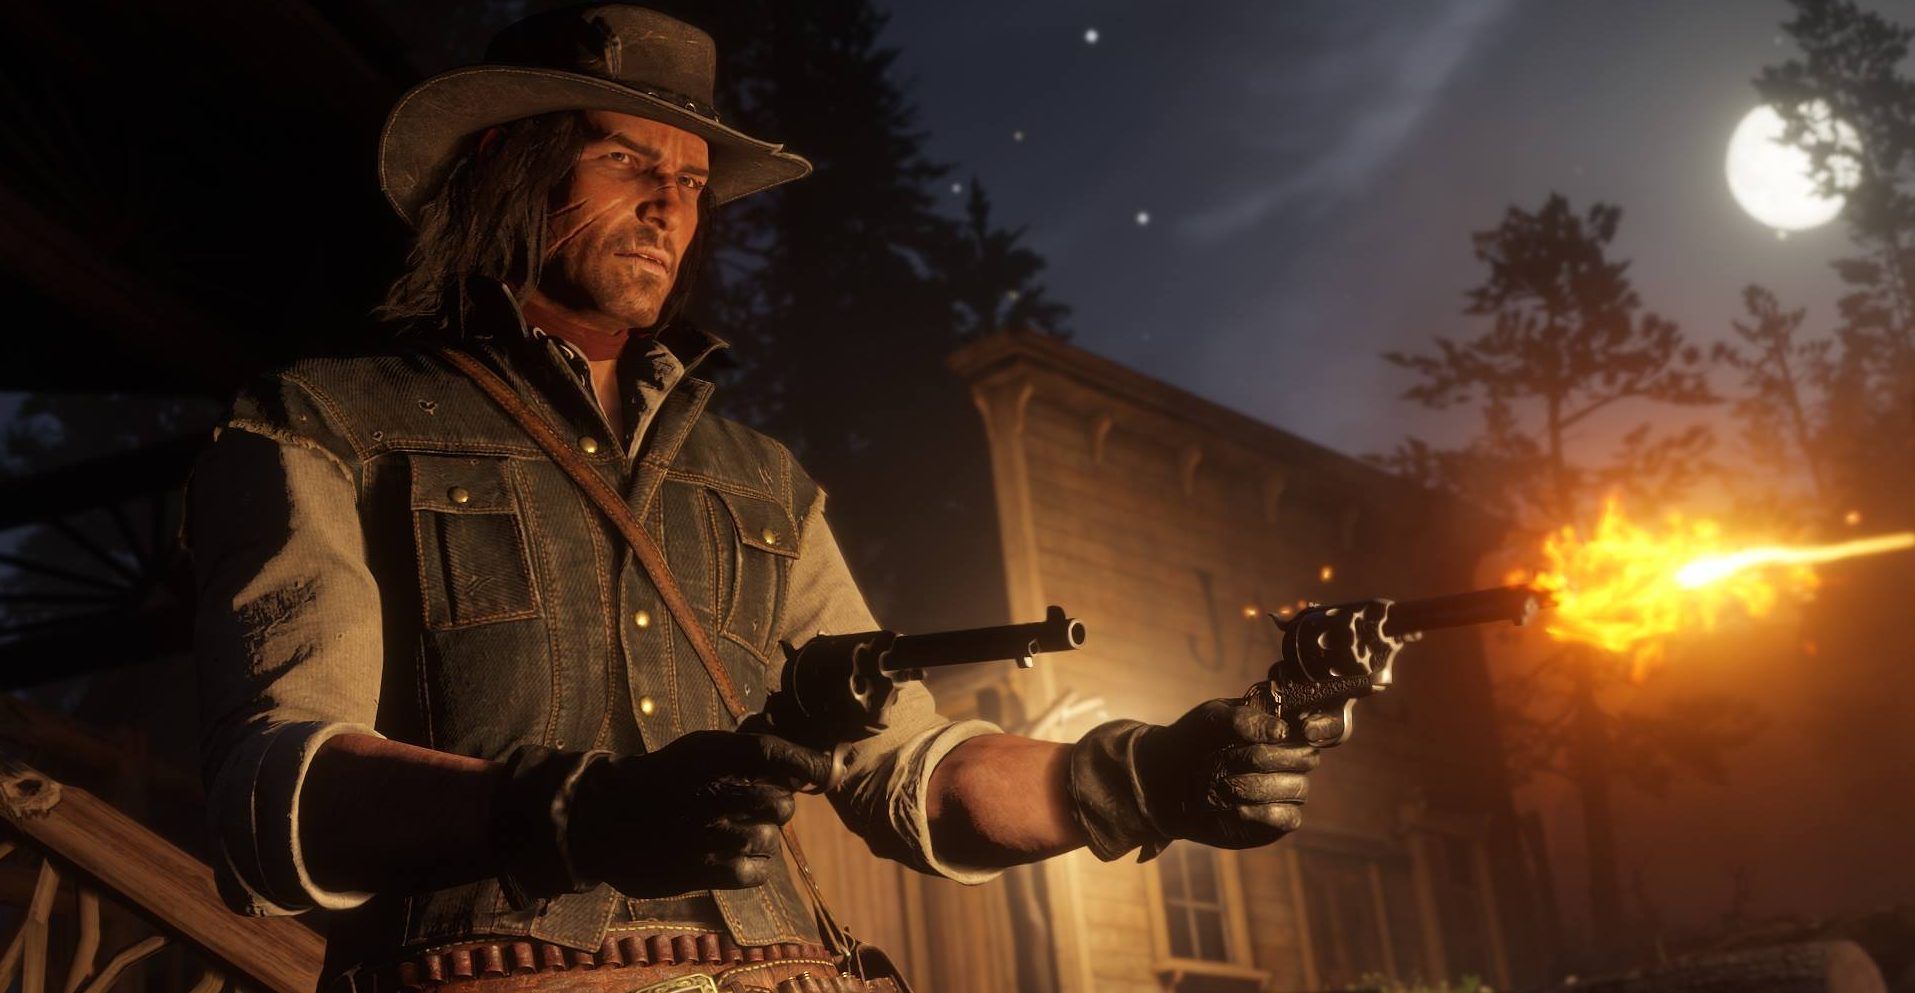 Sony's Red Dead Redemption 2 PS4 Pro bundle is available for pre-order -  Polygon